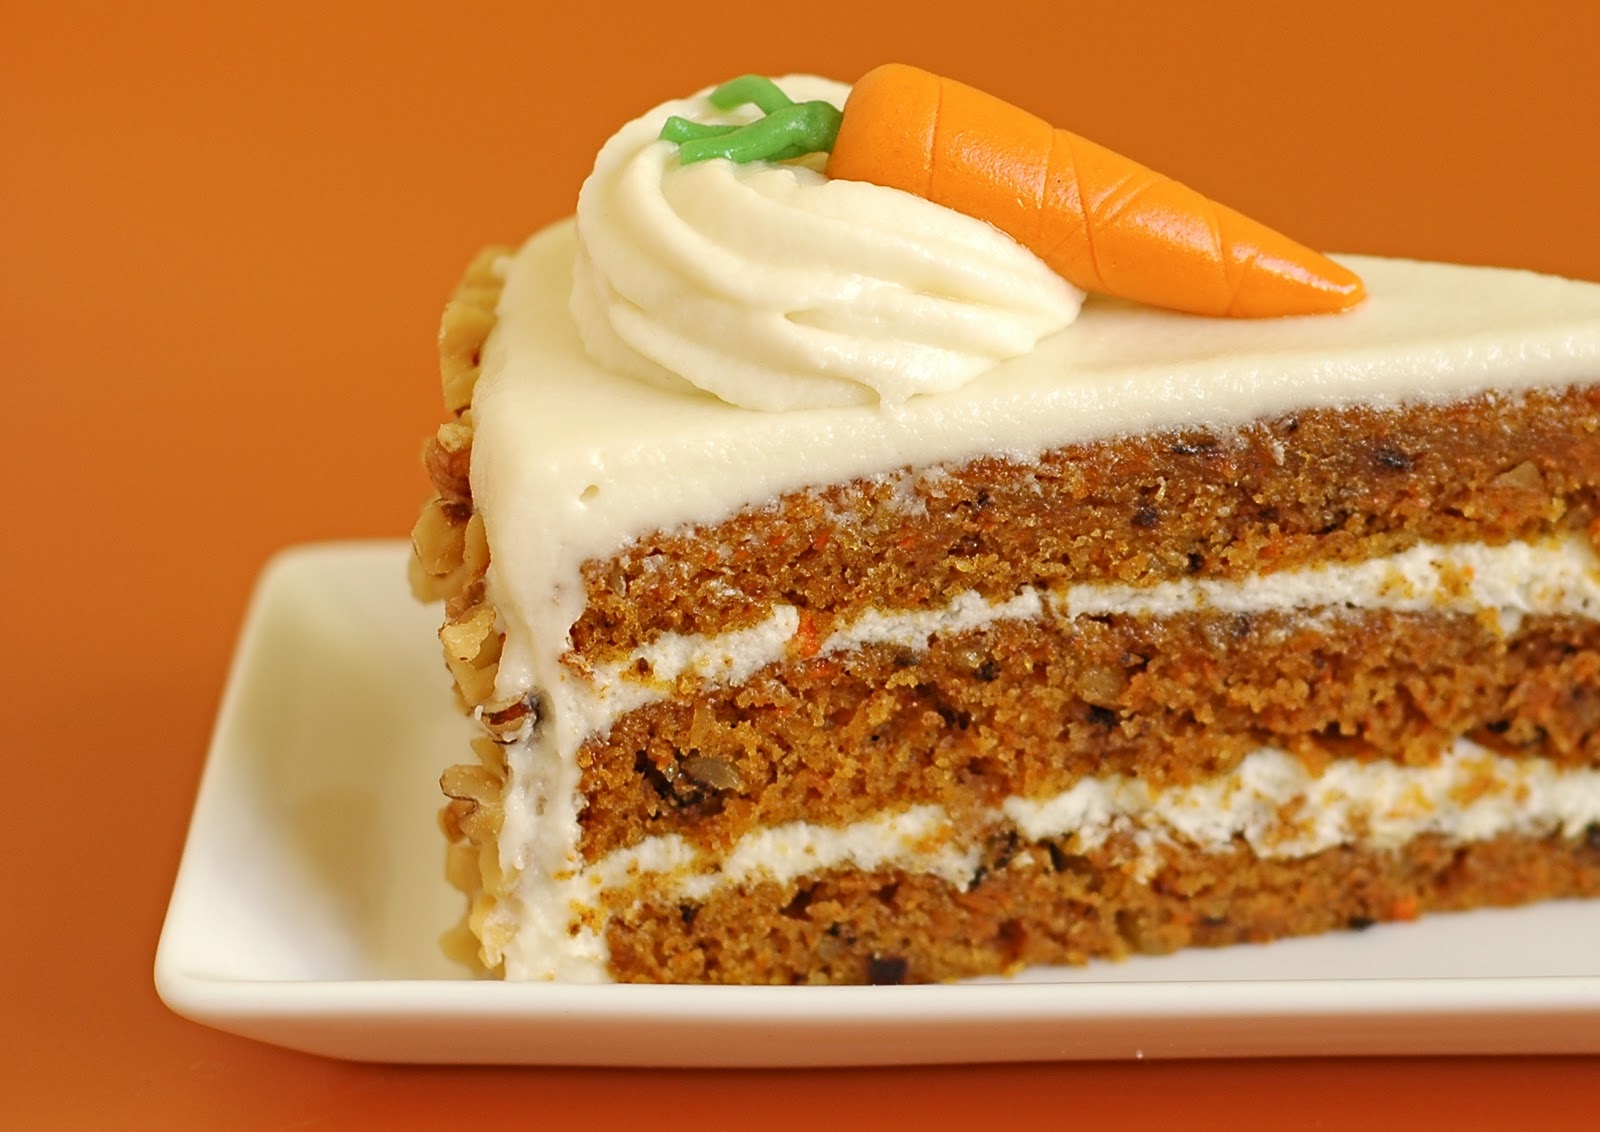 This is a sponge cake (baked from scratch) contains grated carrots, walnuts...